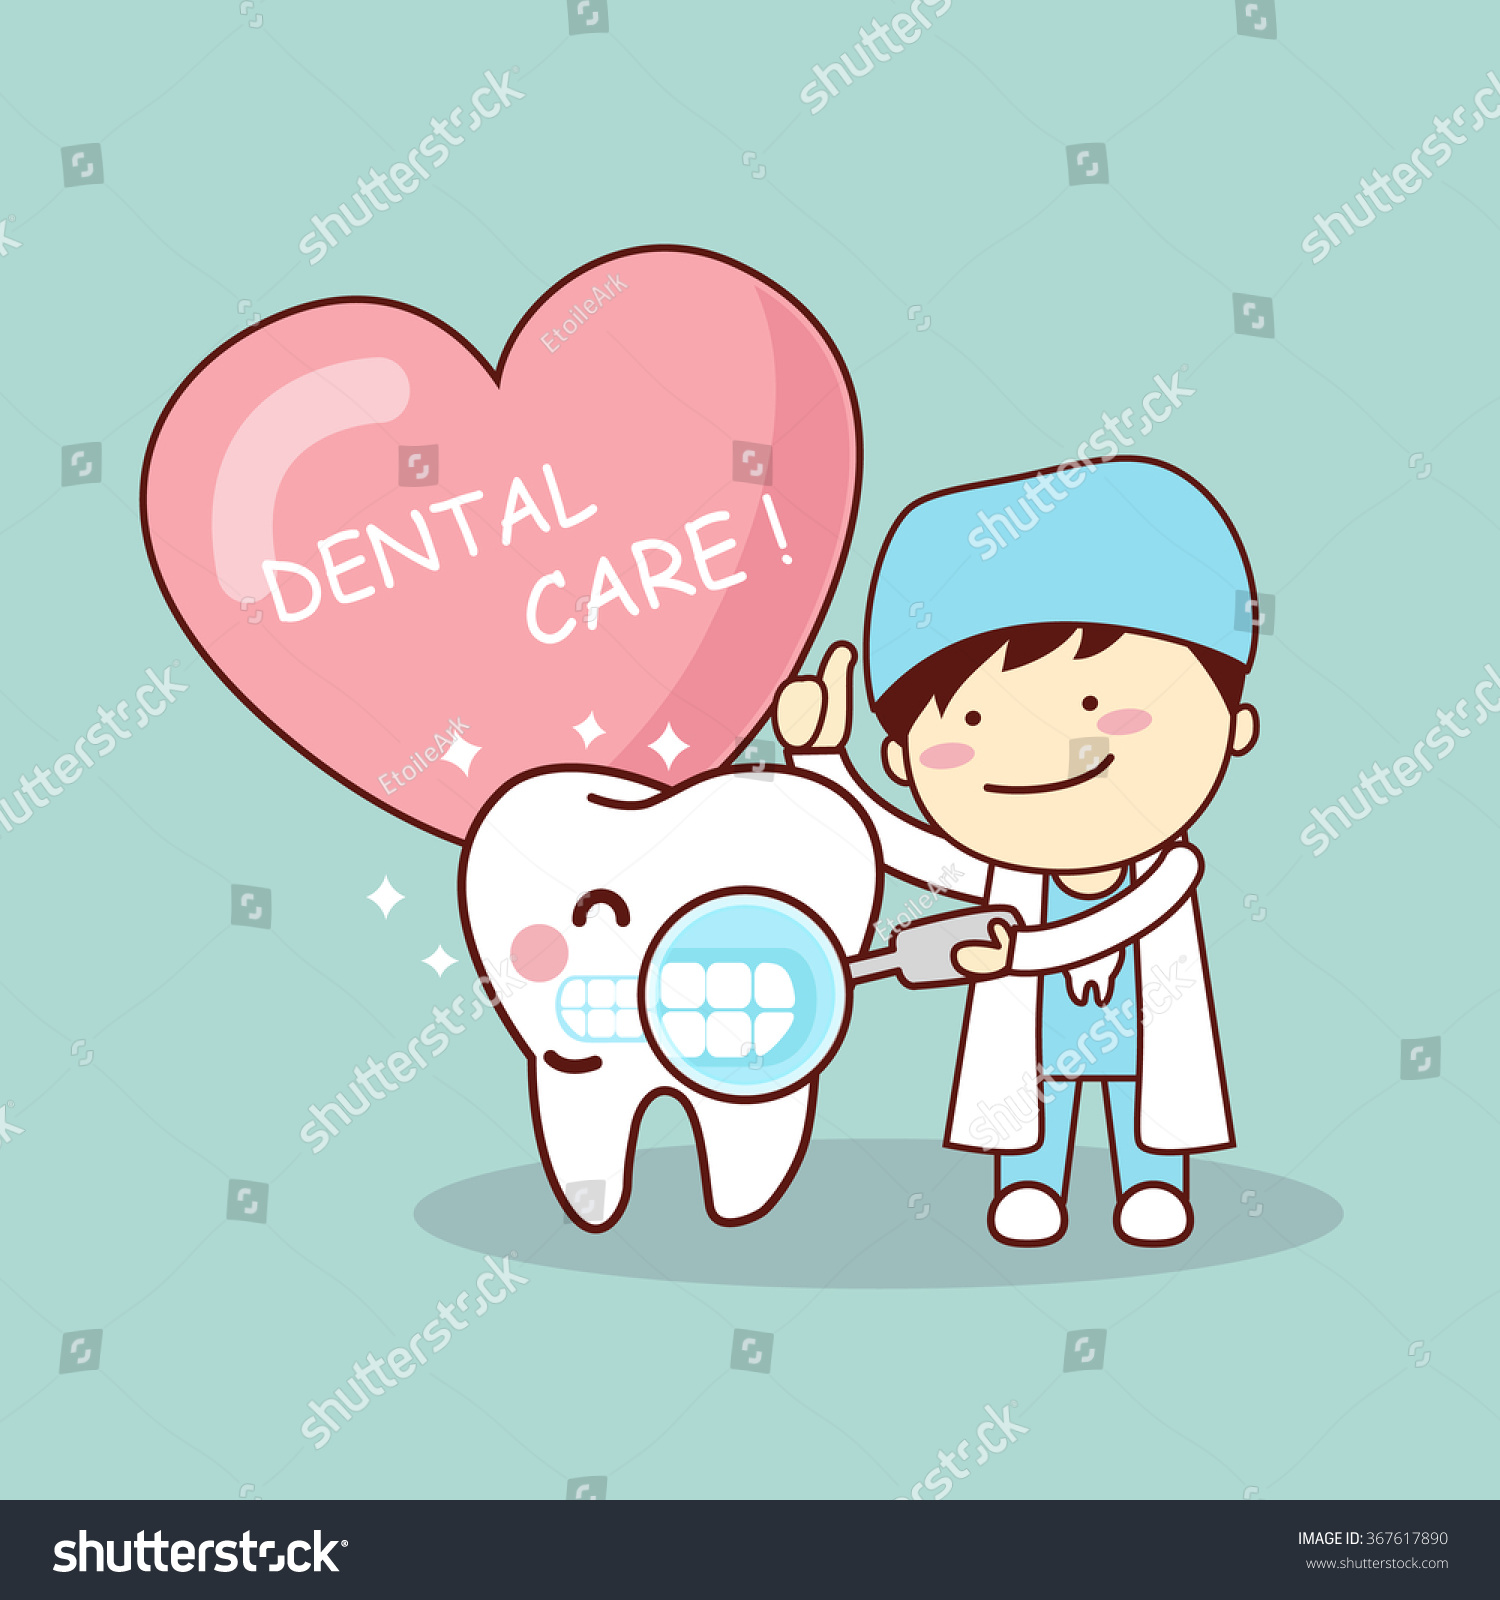 stock-vector-happy-cartoon-tooth-and-dentist-with-love-heart-great-for-health-dental-care-concept-367617890.jpg